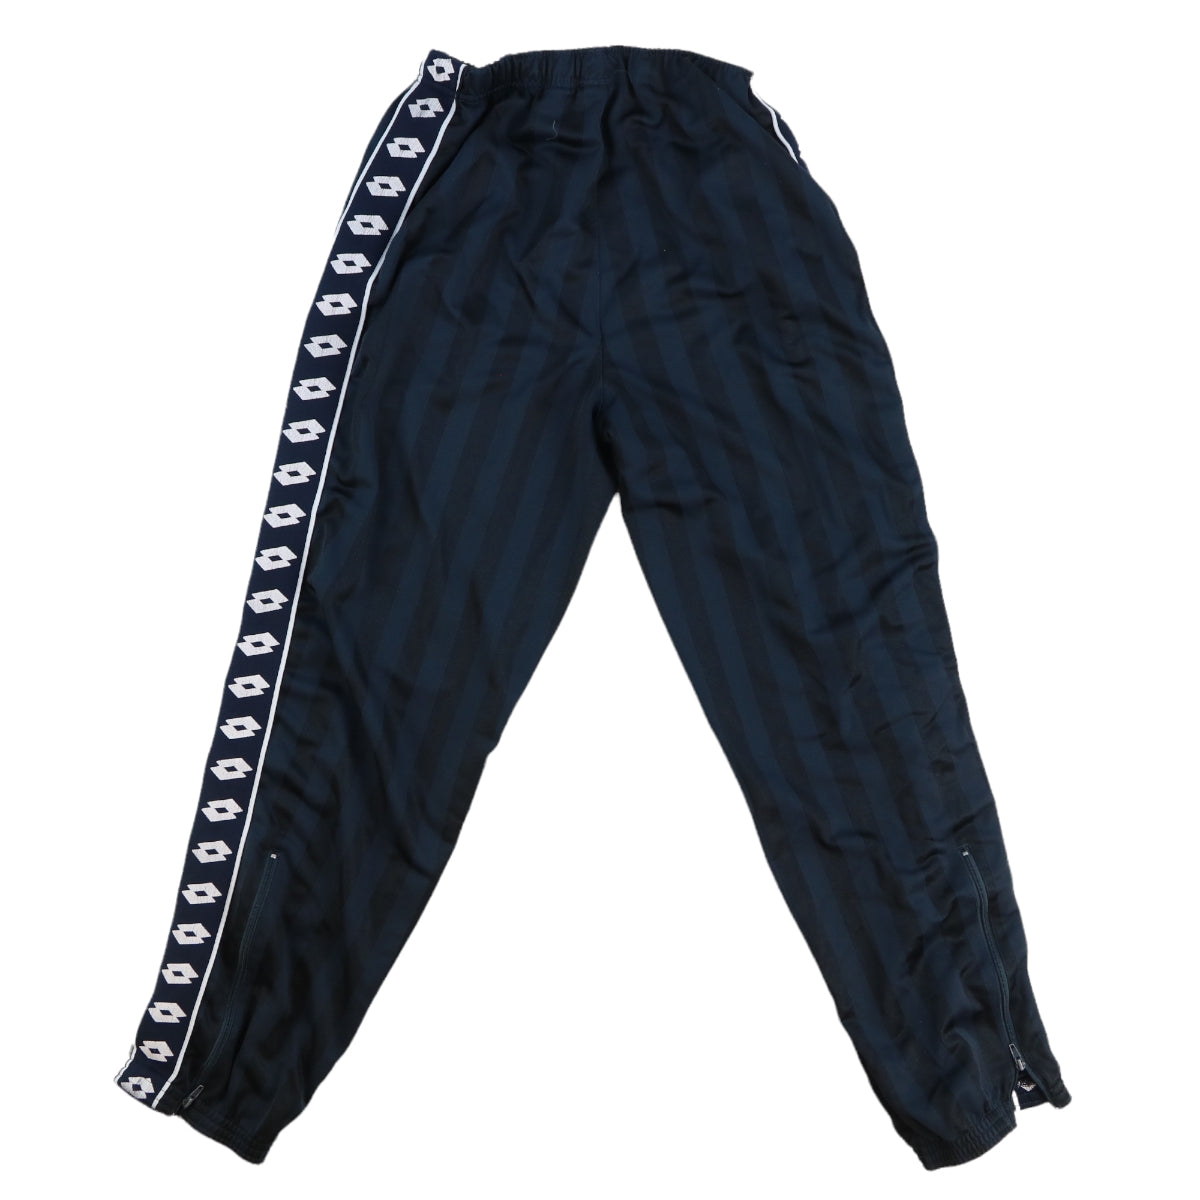 Lotto Tracksuit Bottoms (S)